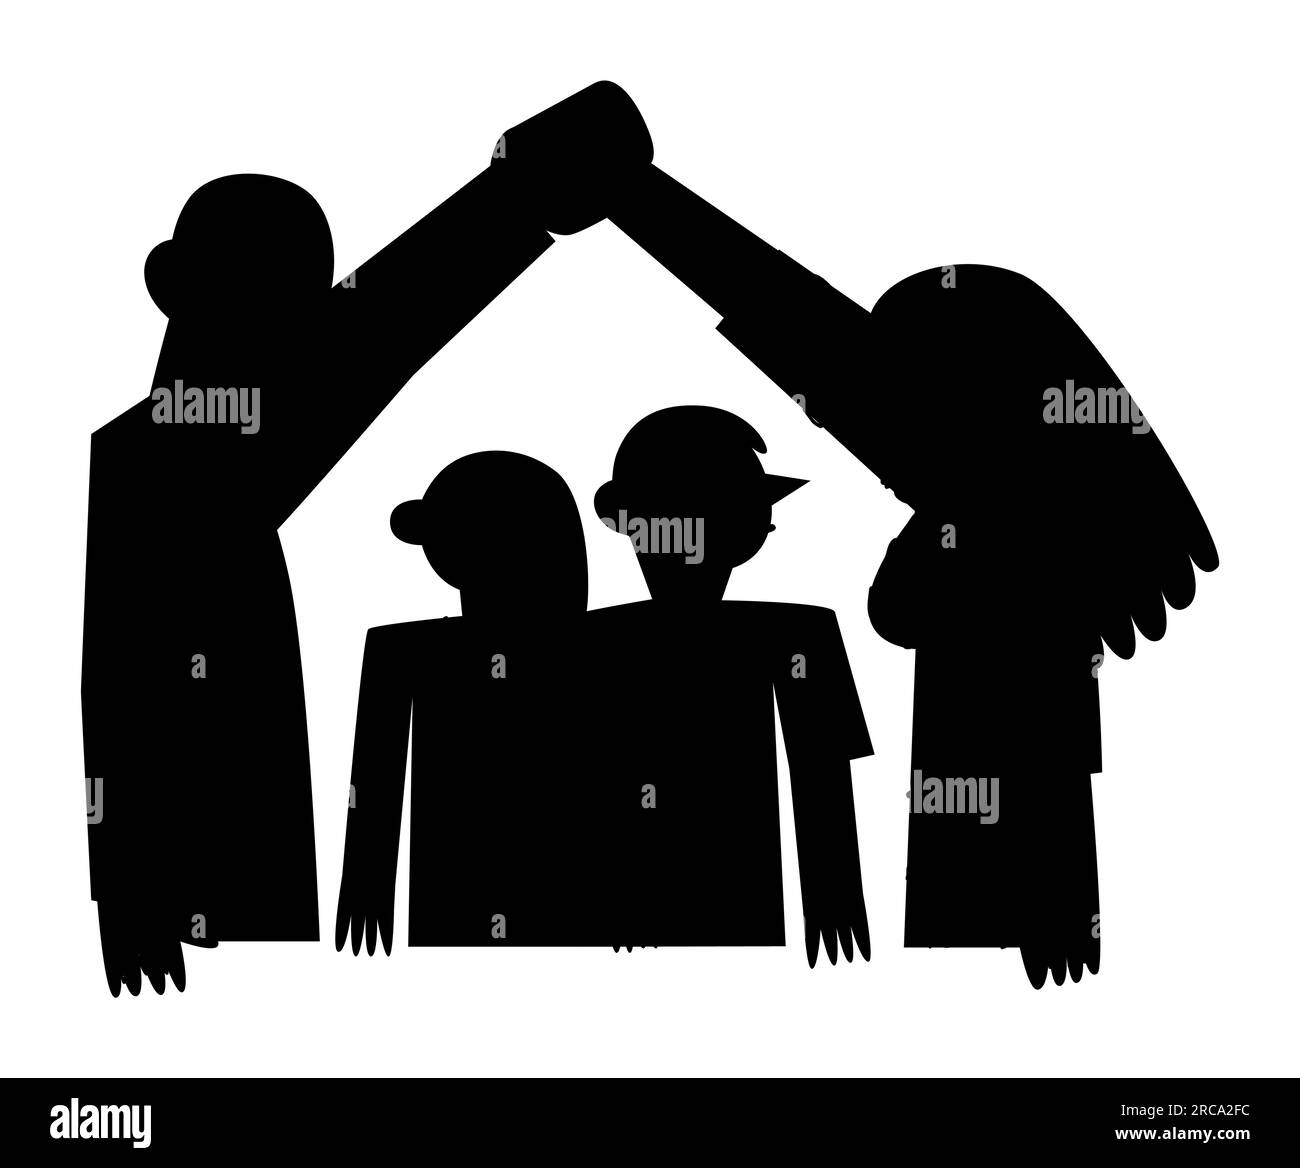 Parents making a home symbol with hands, home sweet home, family love, vector illustration isolated on white background, silhouette Stock Vector